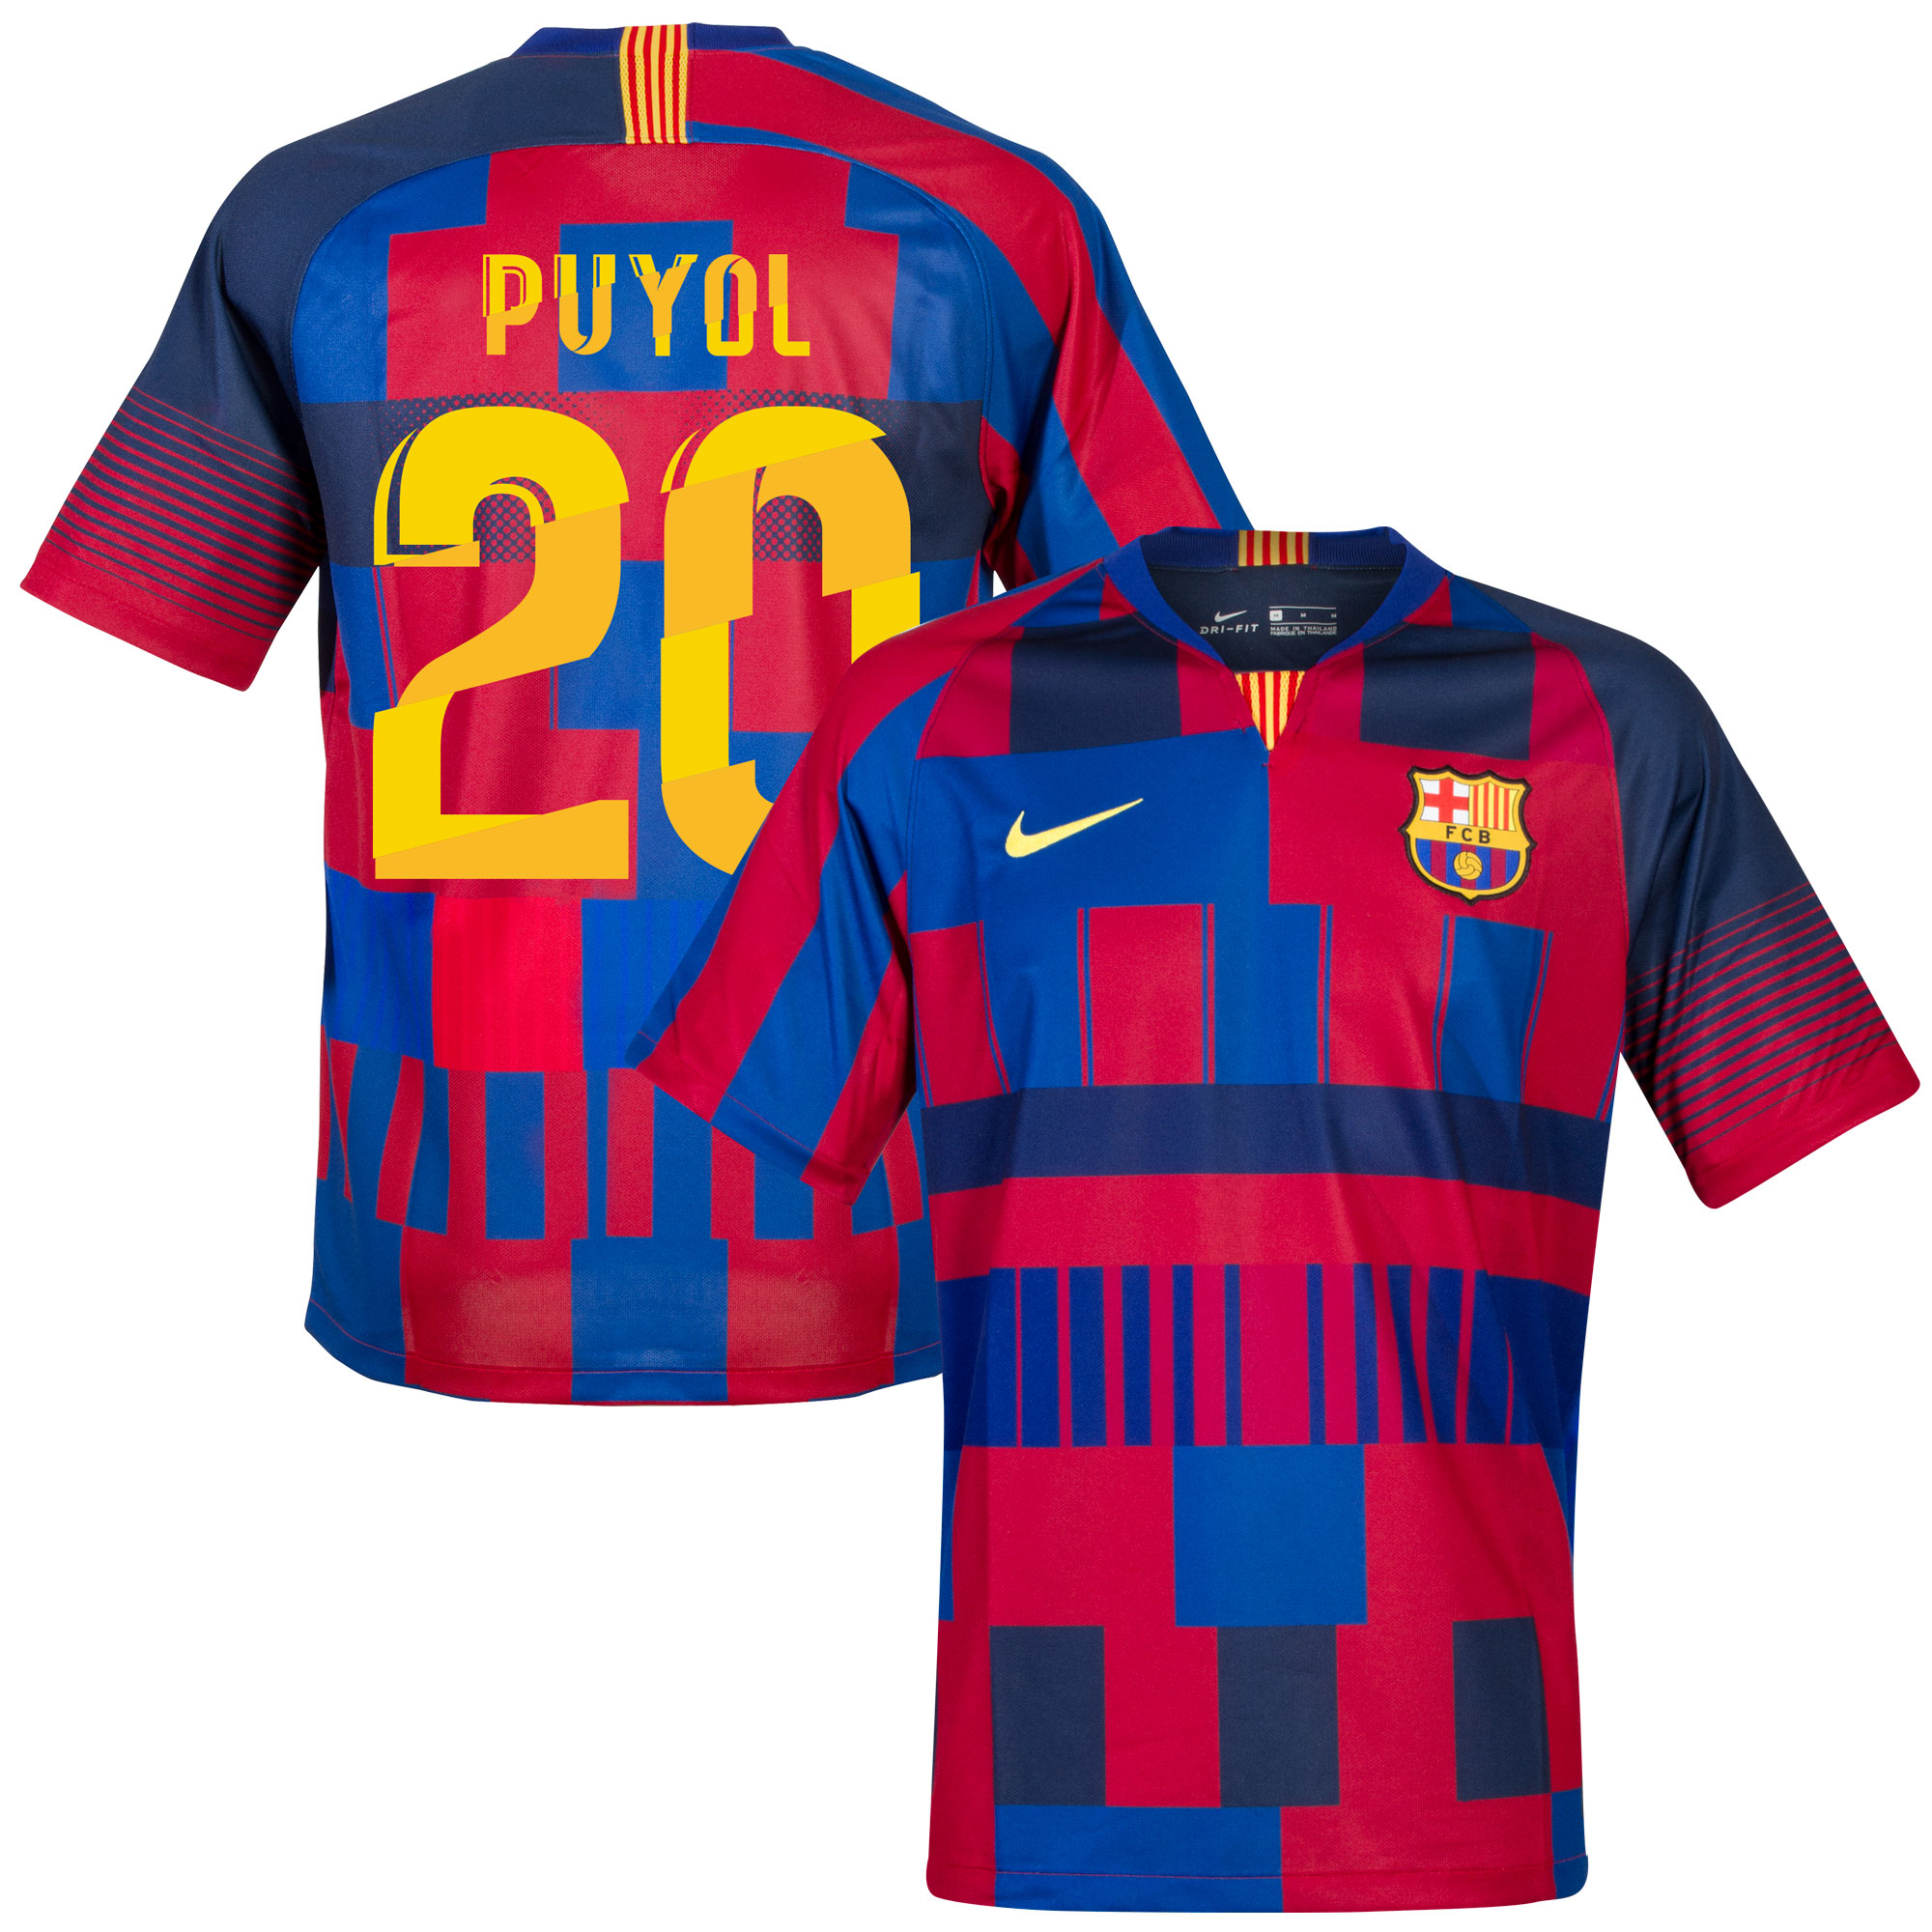 Barcelona x Nike 20th Anniversary Voetbalshirt + Puyol 20 (Special Edition Fan Style Printing)